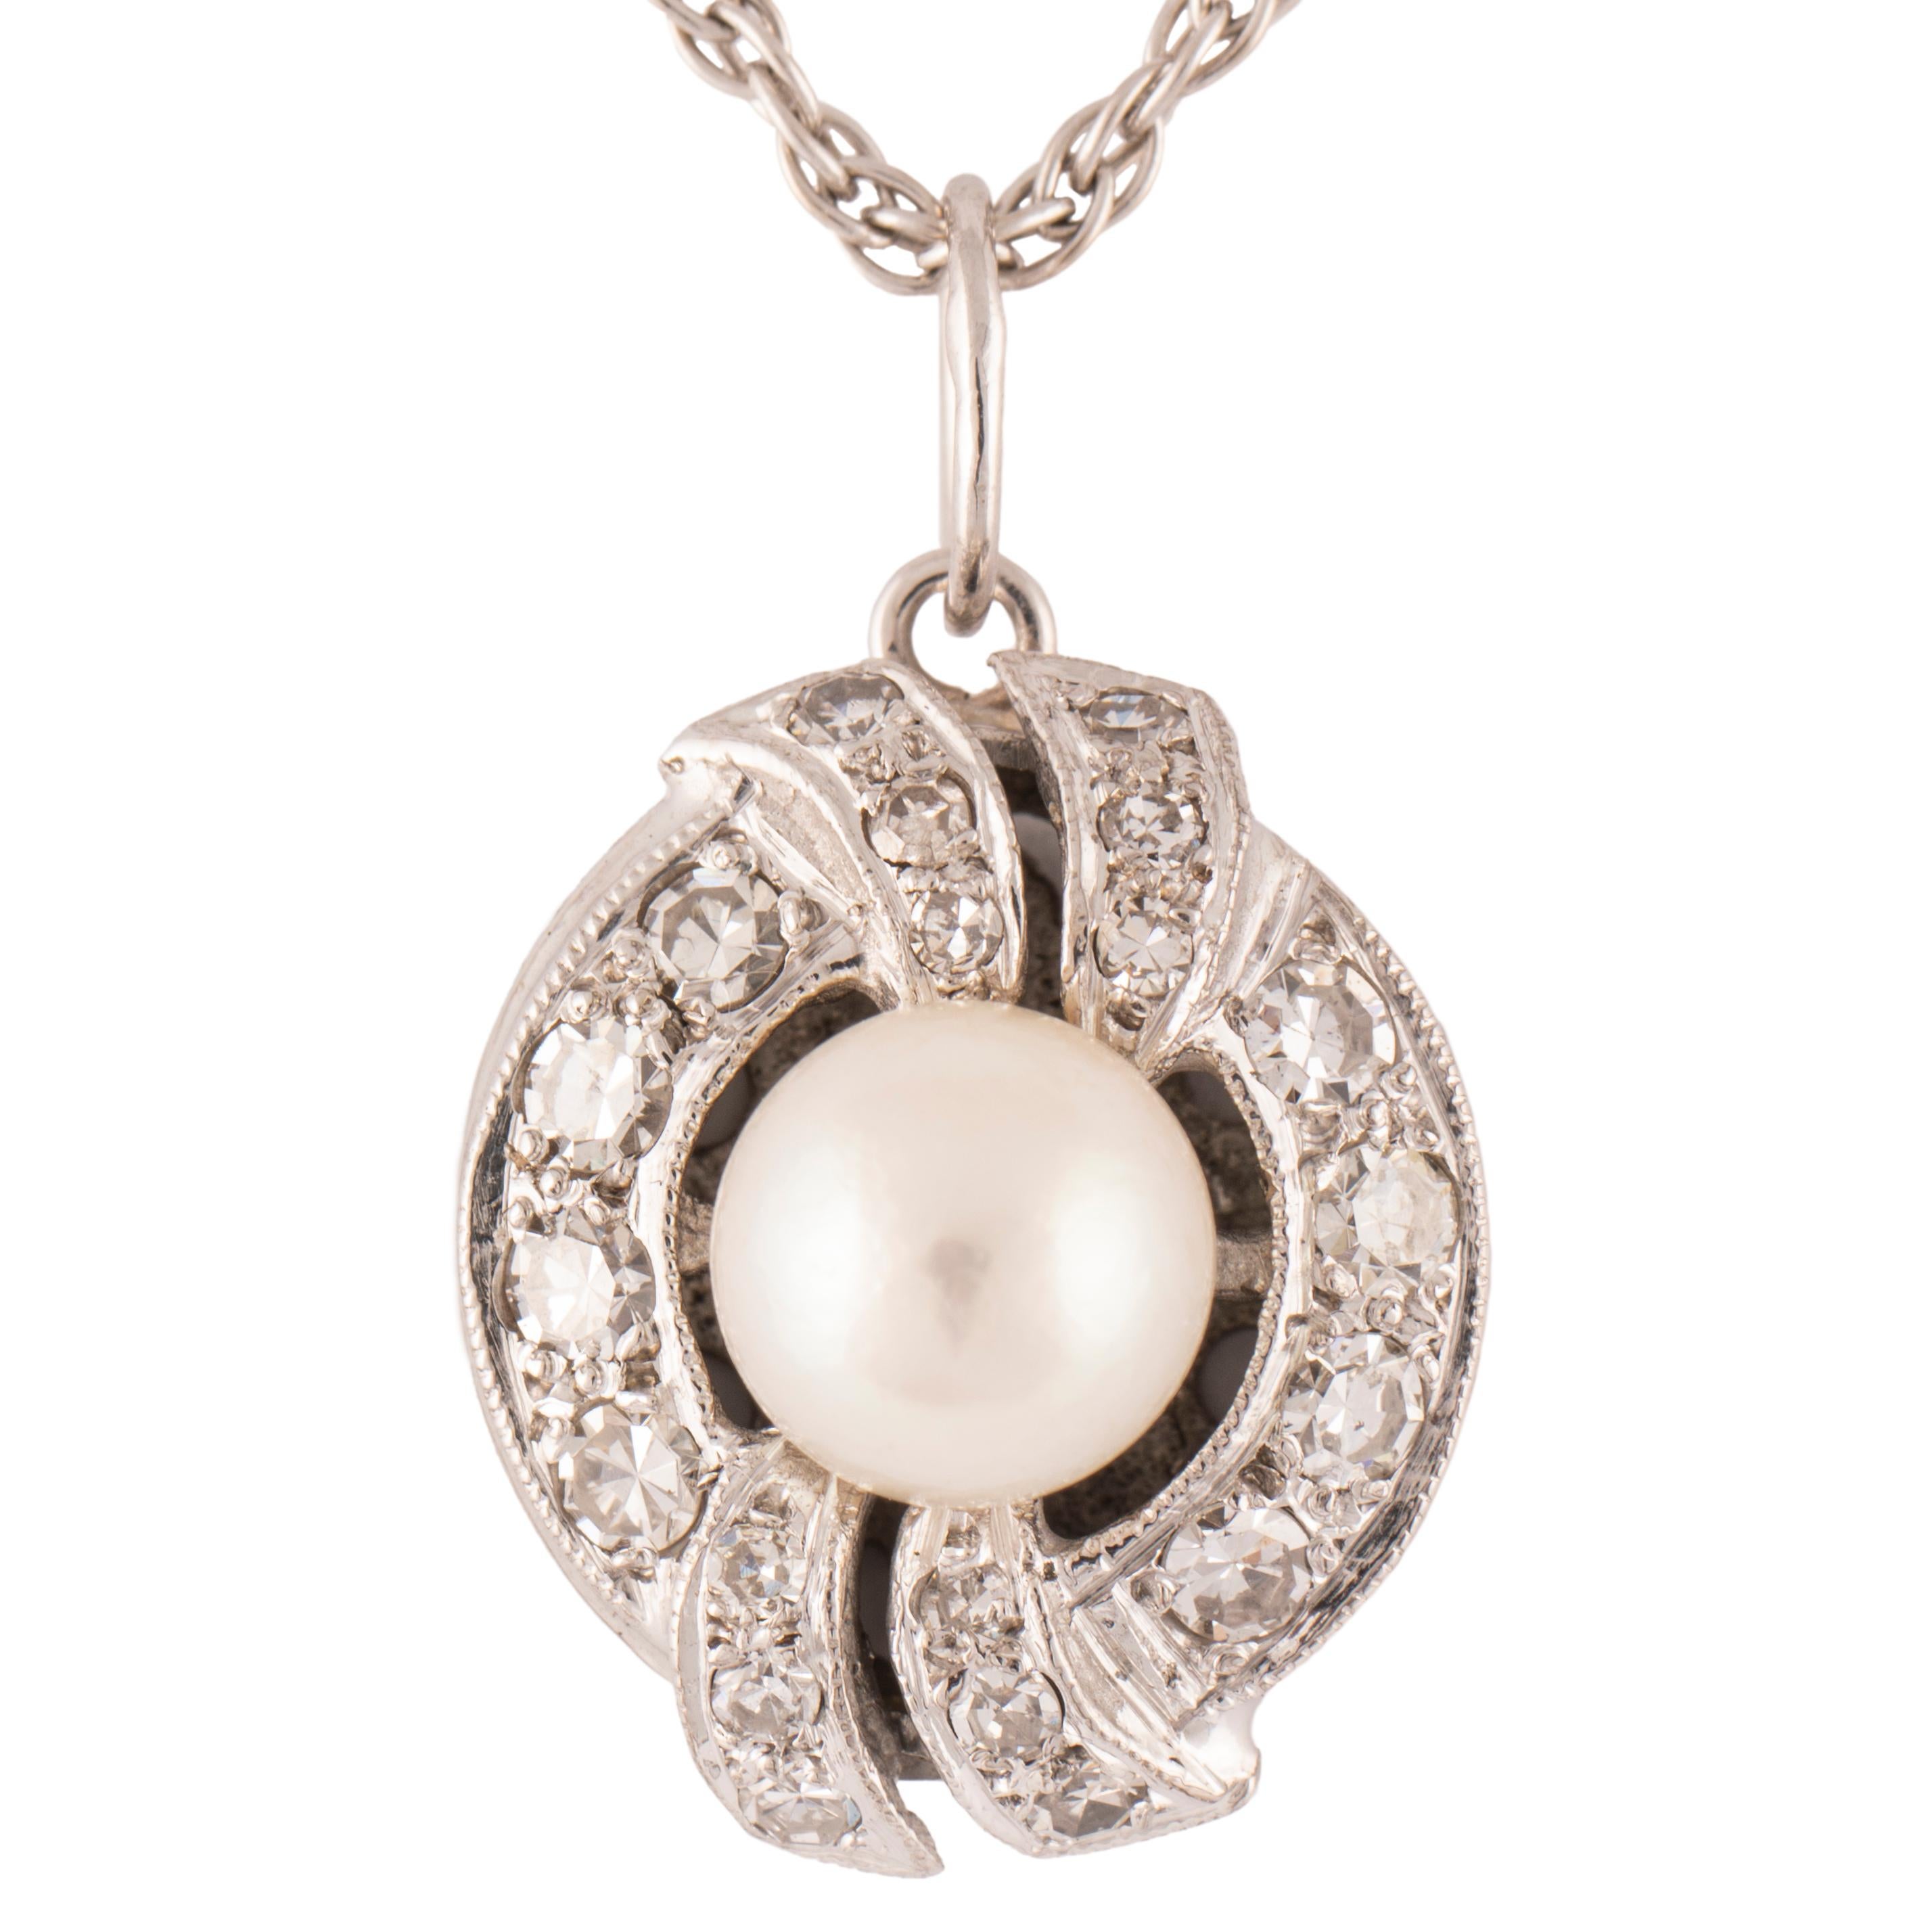 Beautiful cultured pearl and diamond pendant enhanced with scrolls on the top and bottom mounted in 14k white gold. The front is set with a lustrous pearl measuring approximately 6.4mm diam., surrounded by 20 round bright near colorless single cut